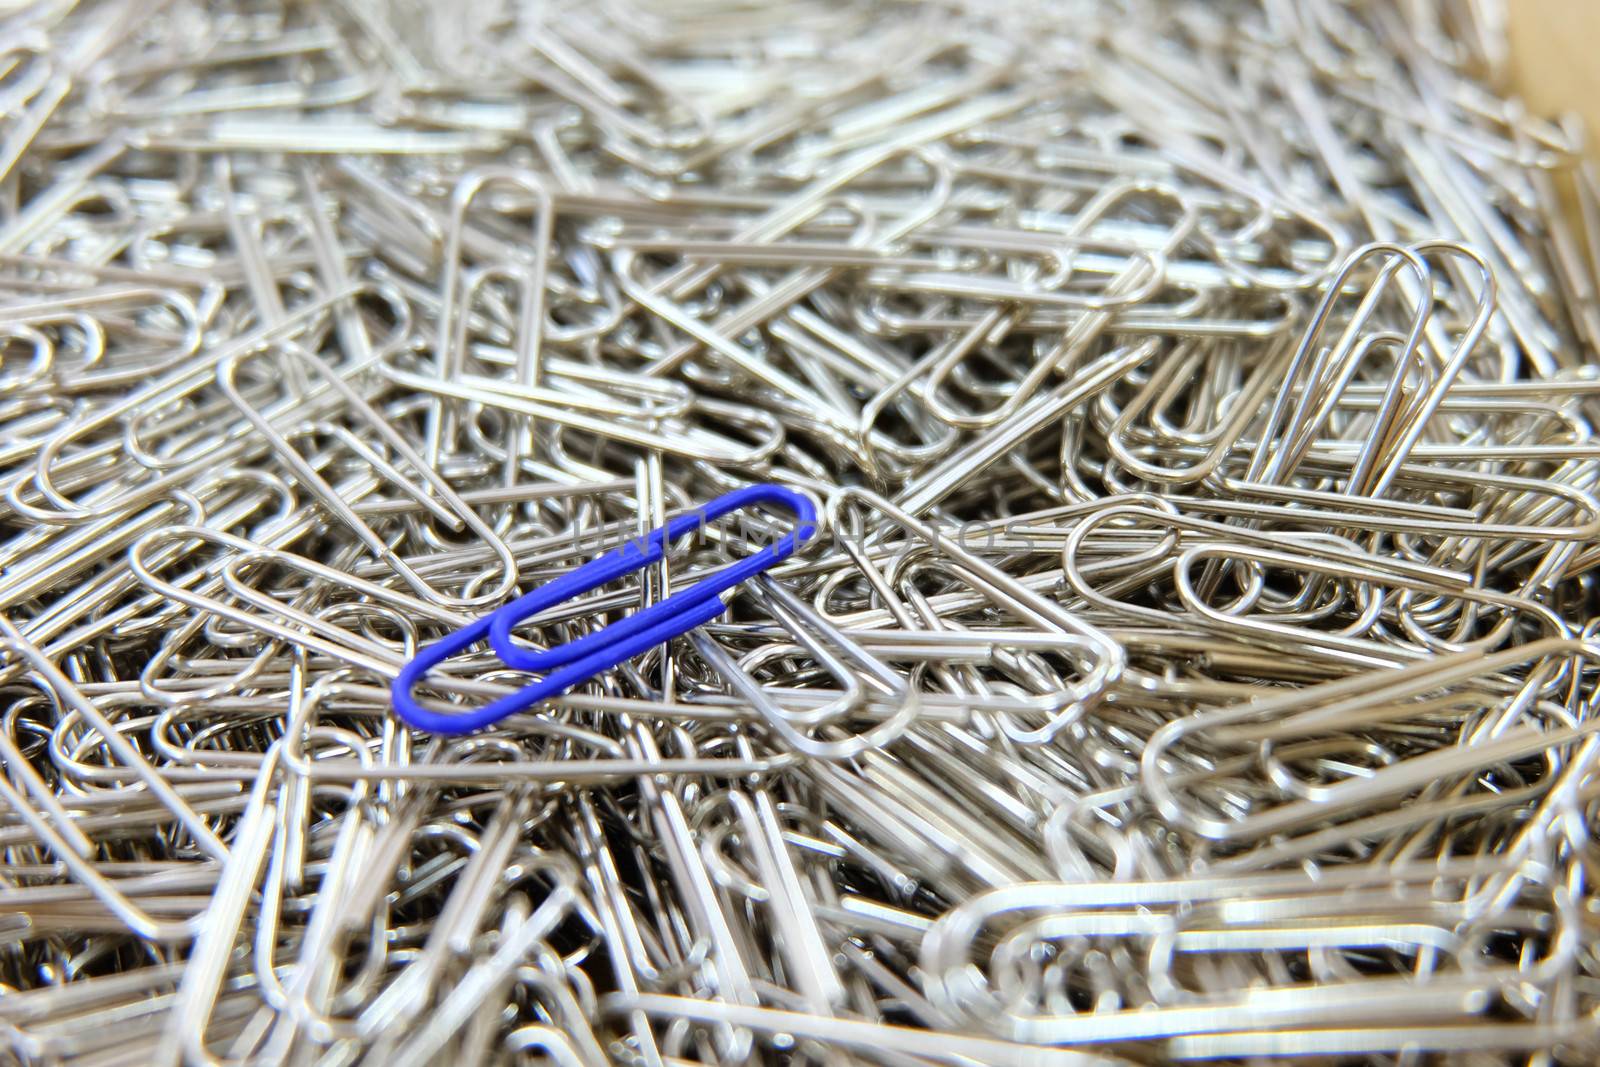 Dark blue paper clip on multiple paper clips background.